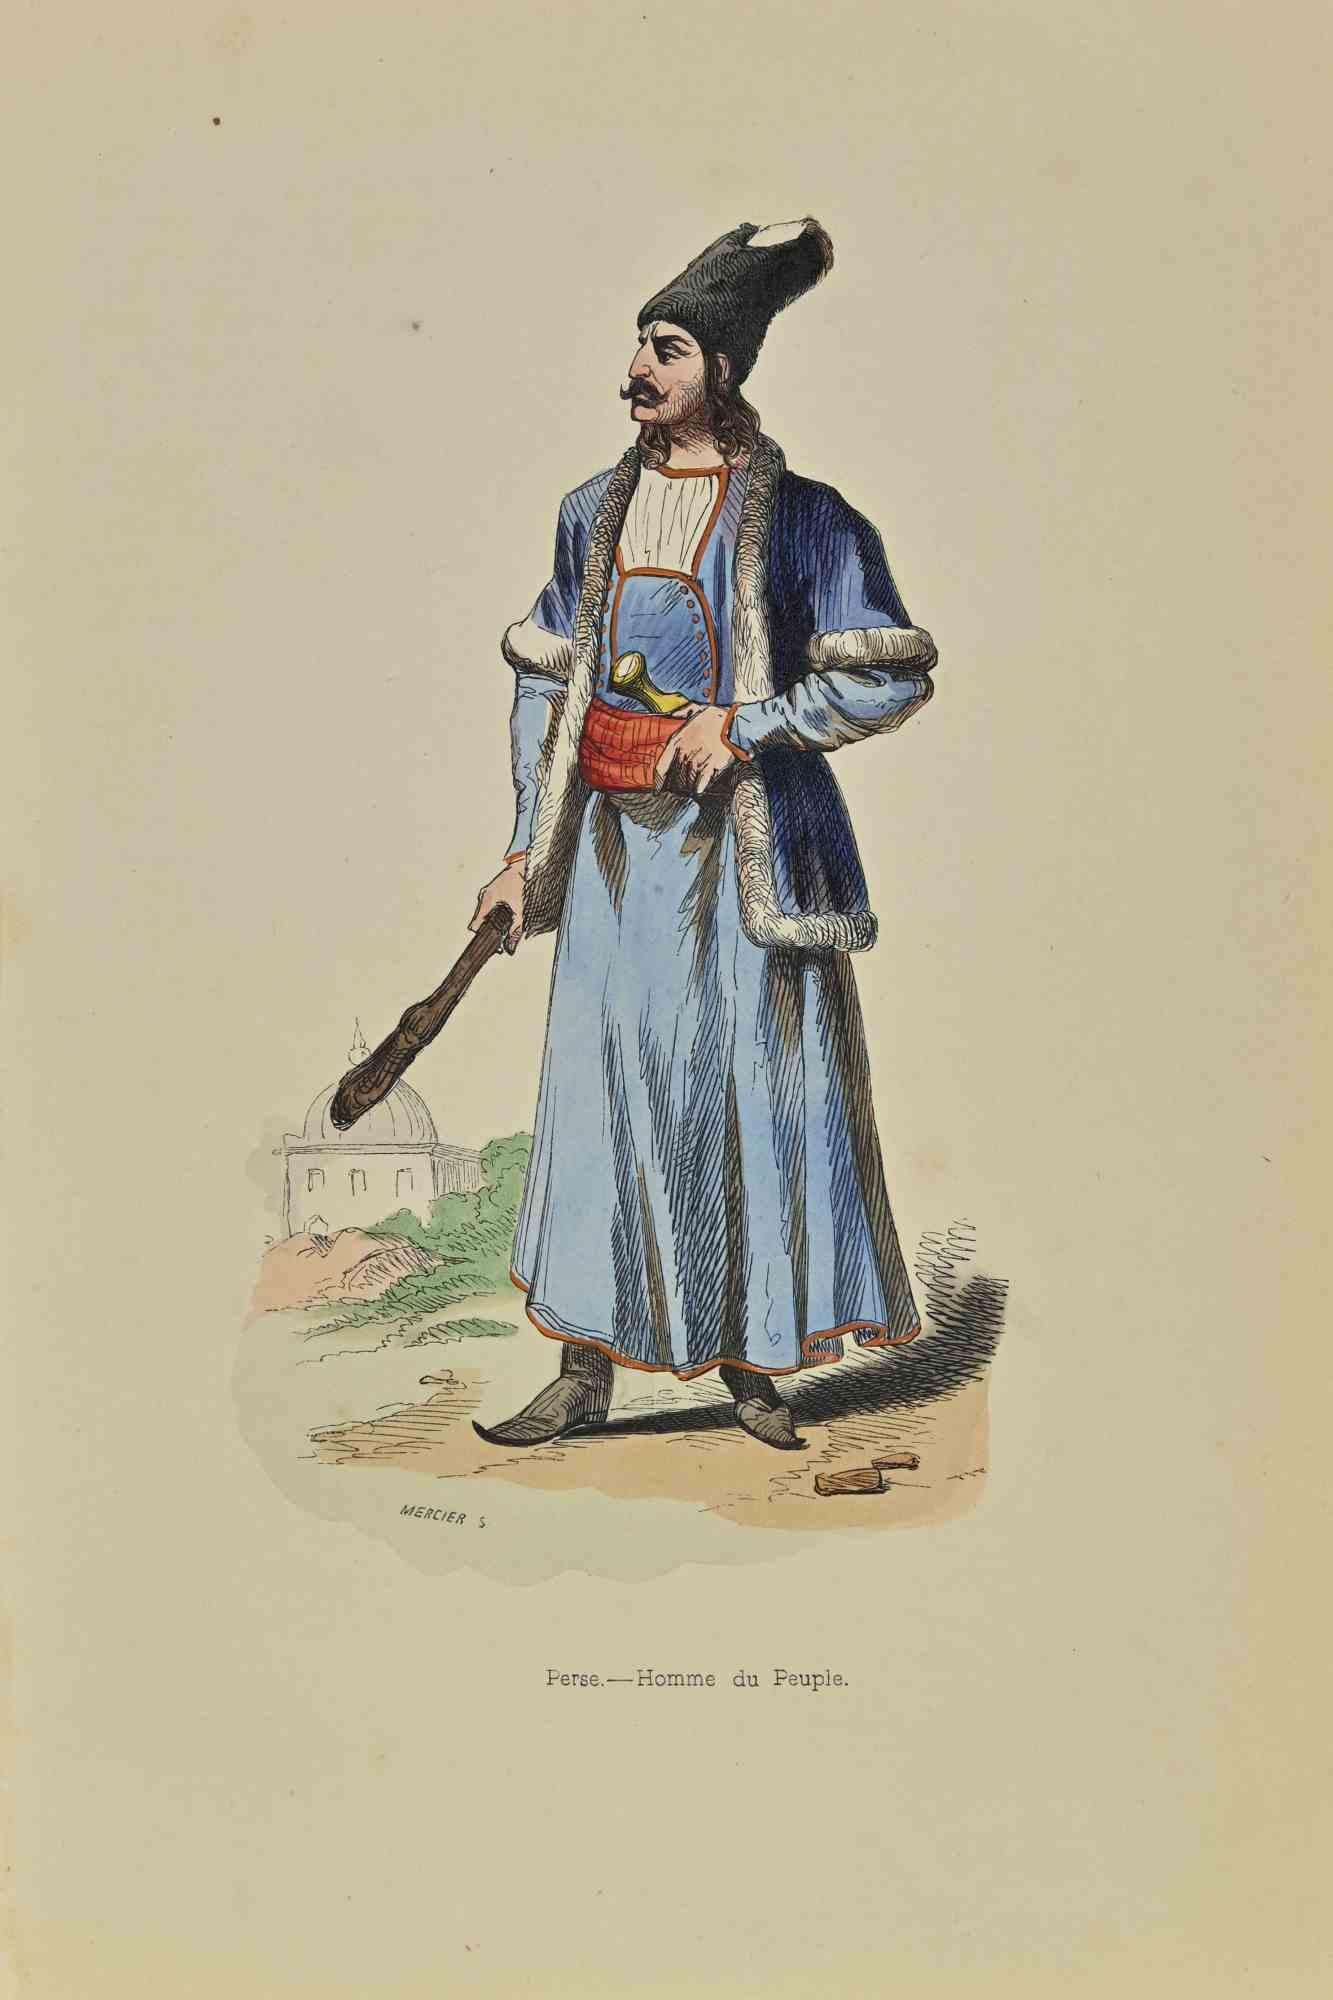 Persian, Man of the People is a lithograph made by Auguste Wahlen in 1844.

Hand colored.

Good condition.

At the center of the artwork is the original title "Perse. Homme du Peuple".

The work is part of Suite Moeurs, usages et costumes de tous